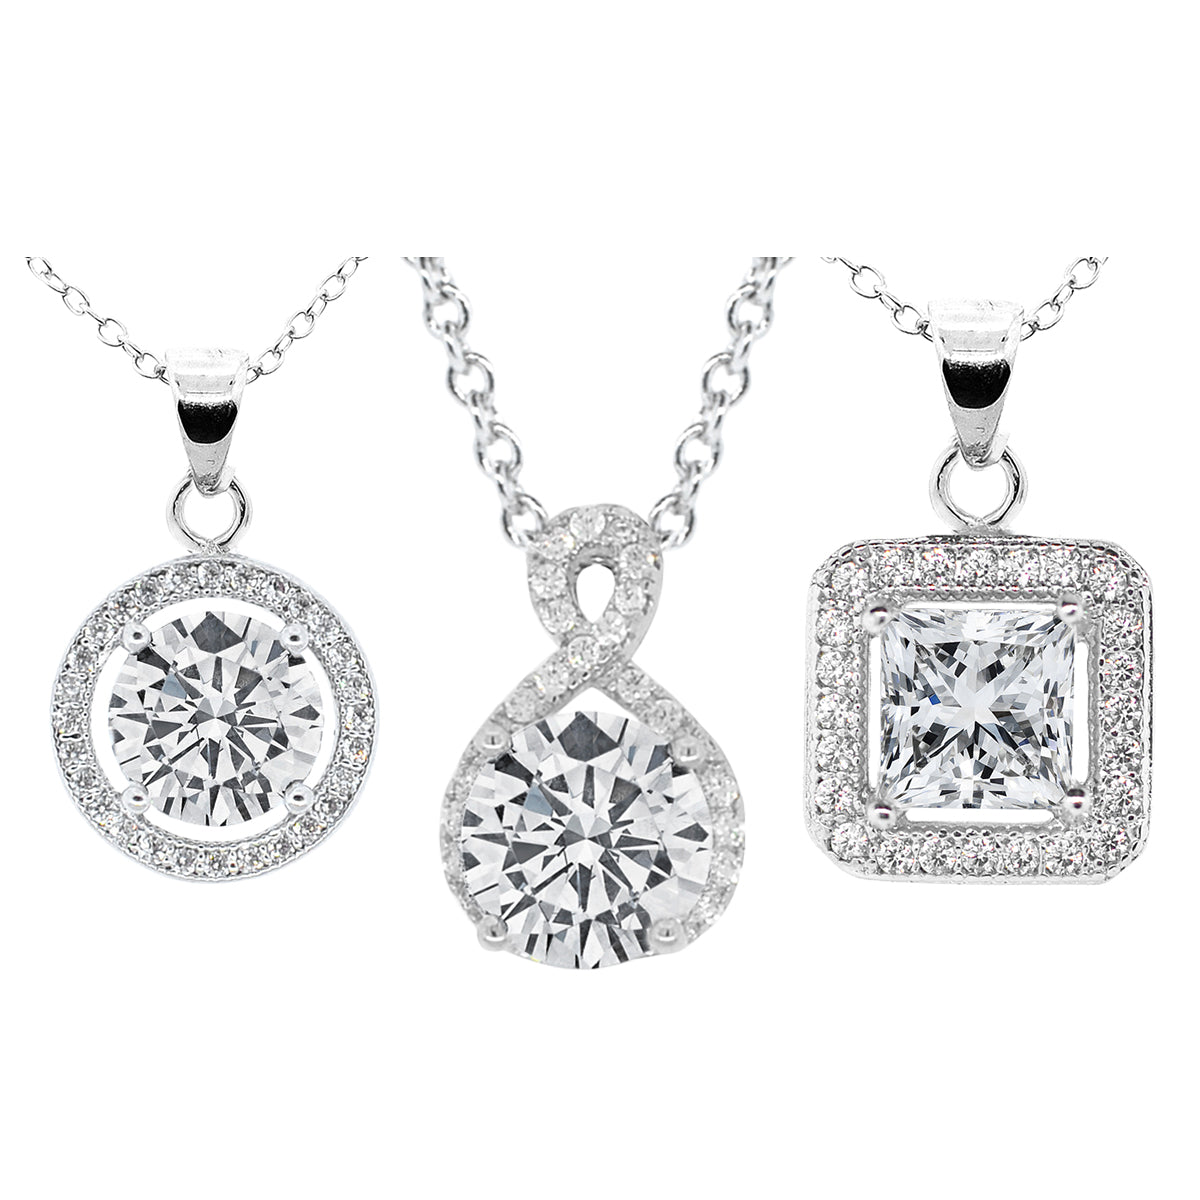 Cate & Chloe Necklace Pack of 3 - Blake, Ivy, Alessandra White Gold Plated Pendant Necklace for Women